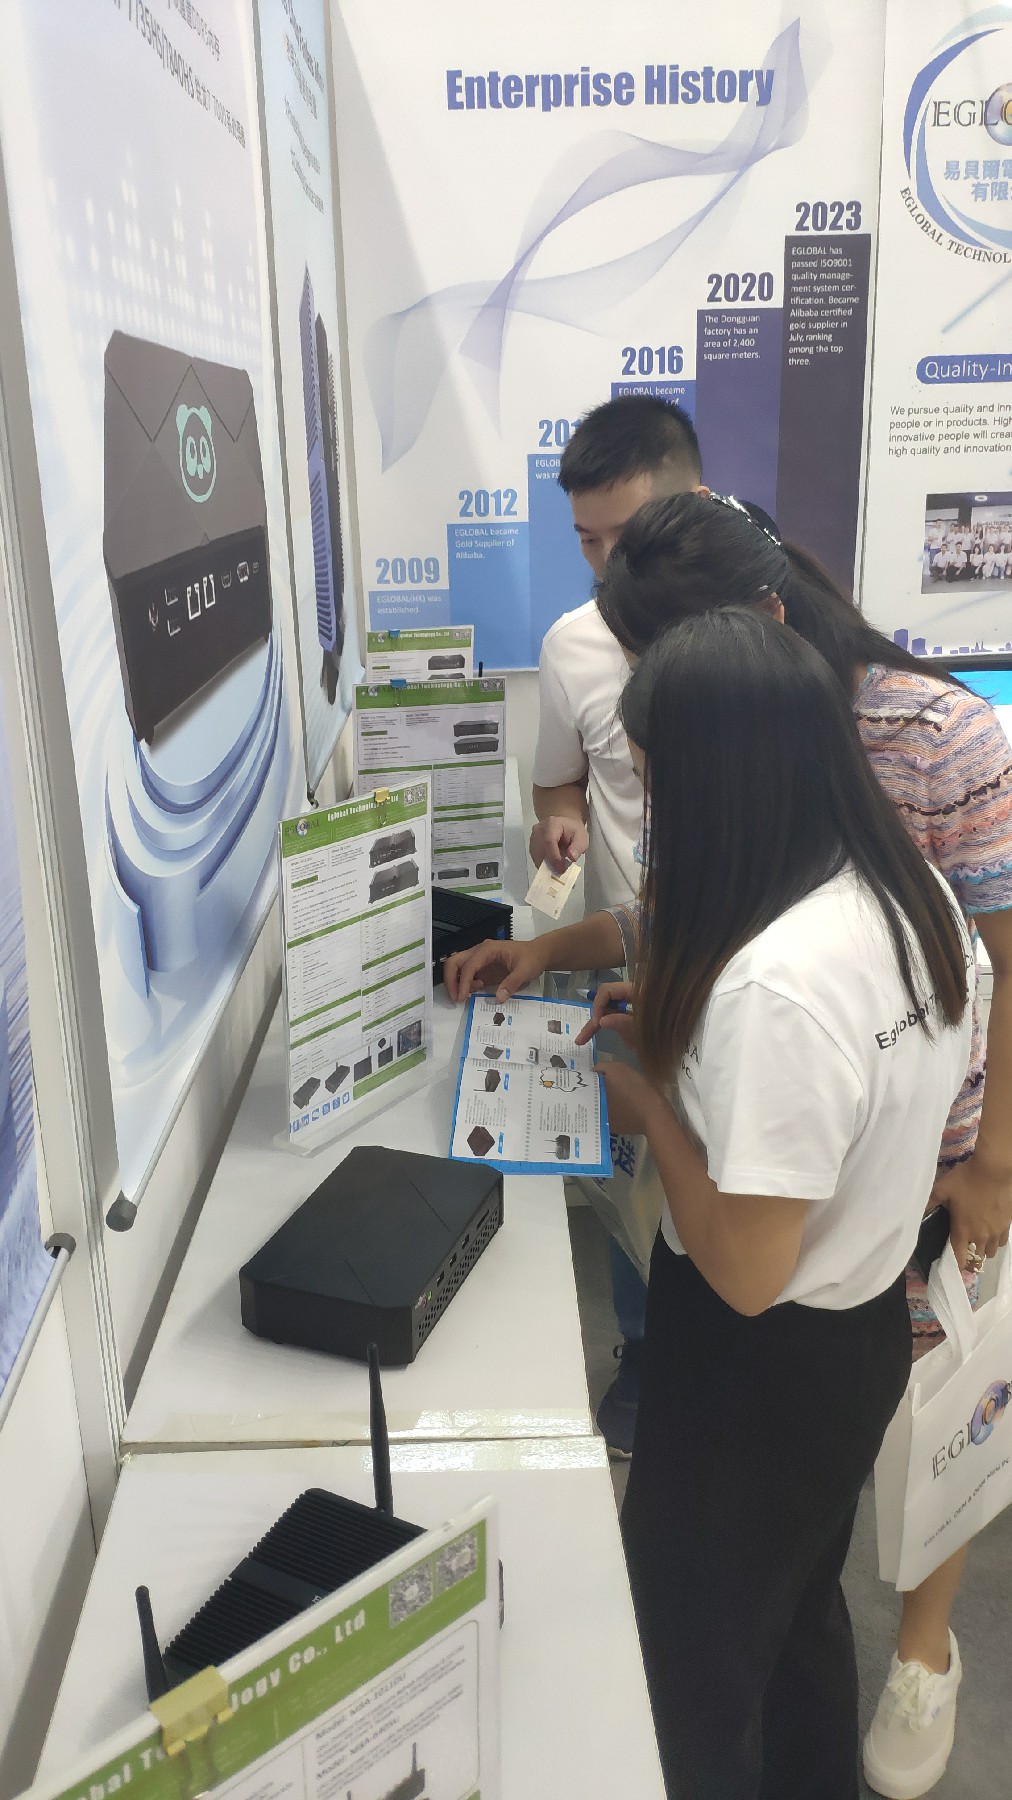 EGSMTPC Mini PC Manufacturer Attends 12.12 Foreign Trade Exhibition In Futian,Shenzhen(图6)